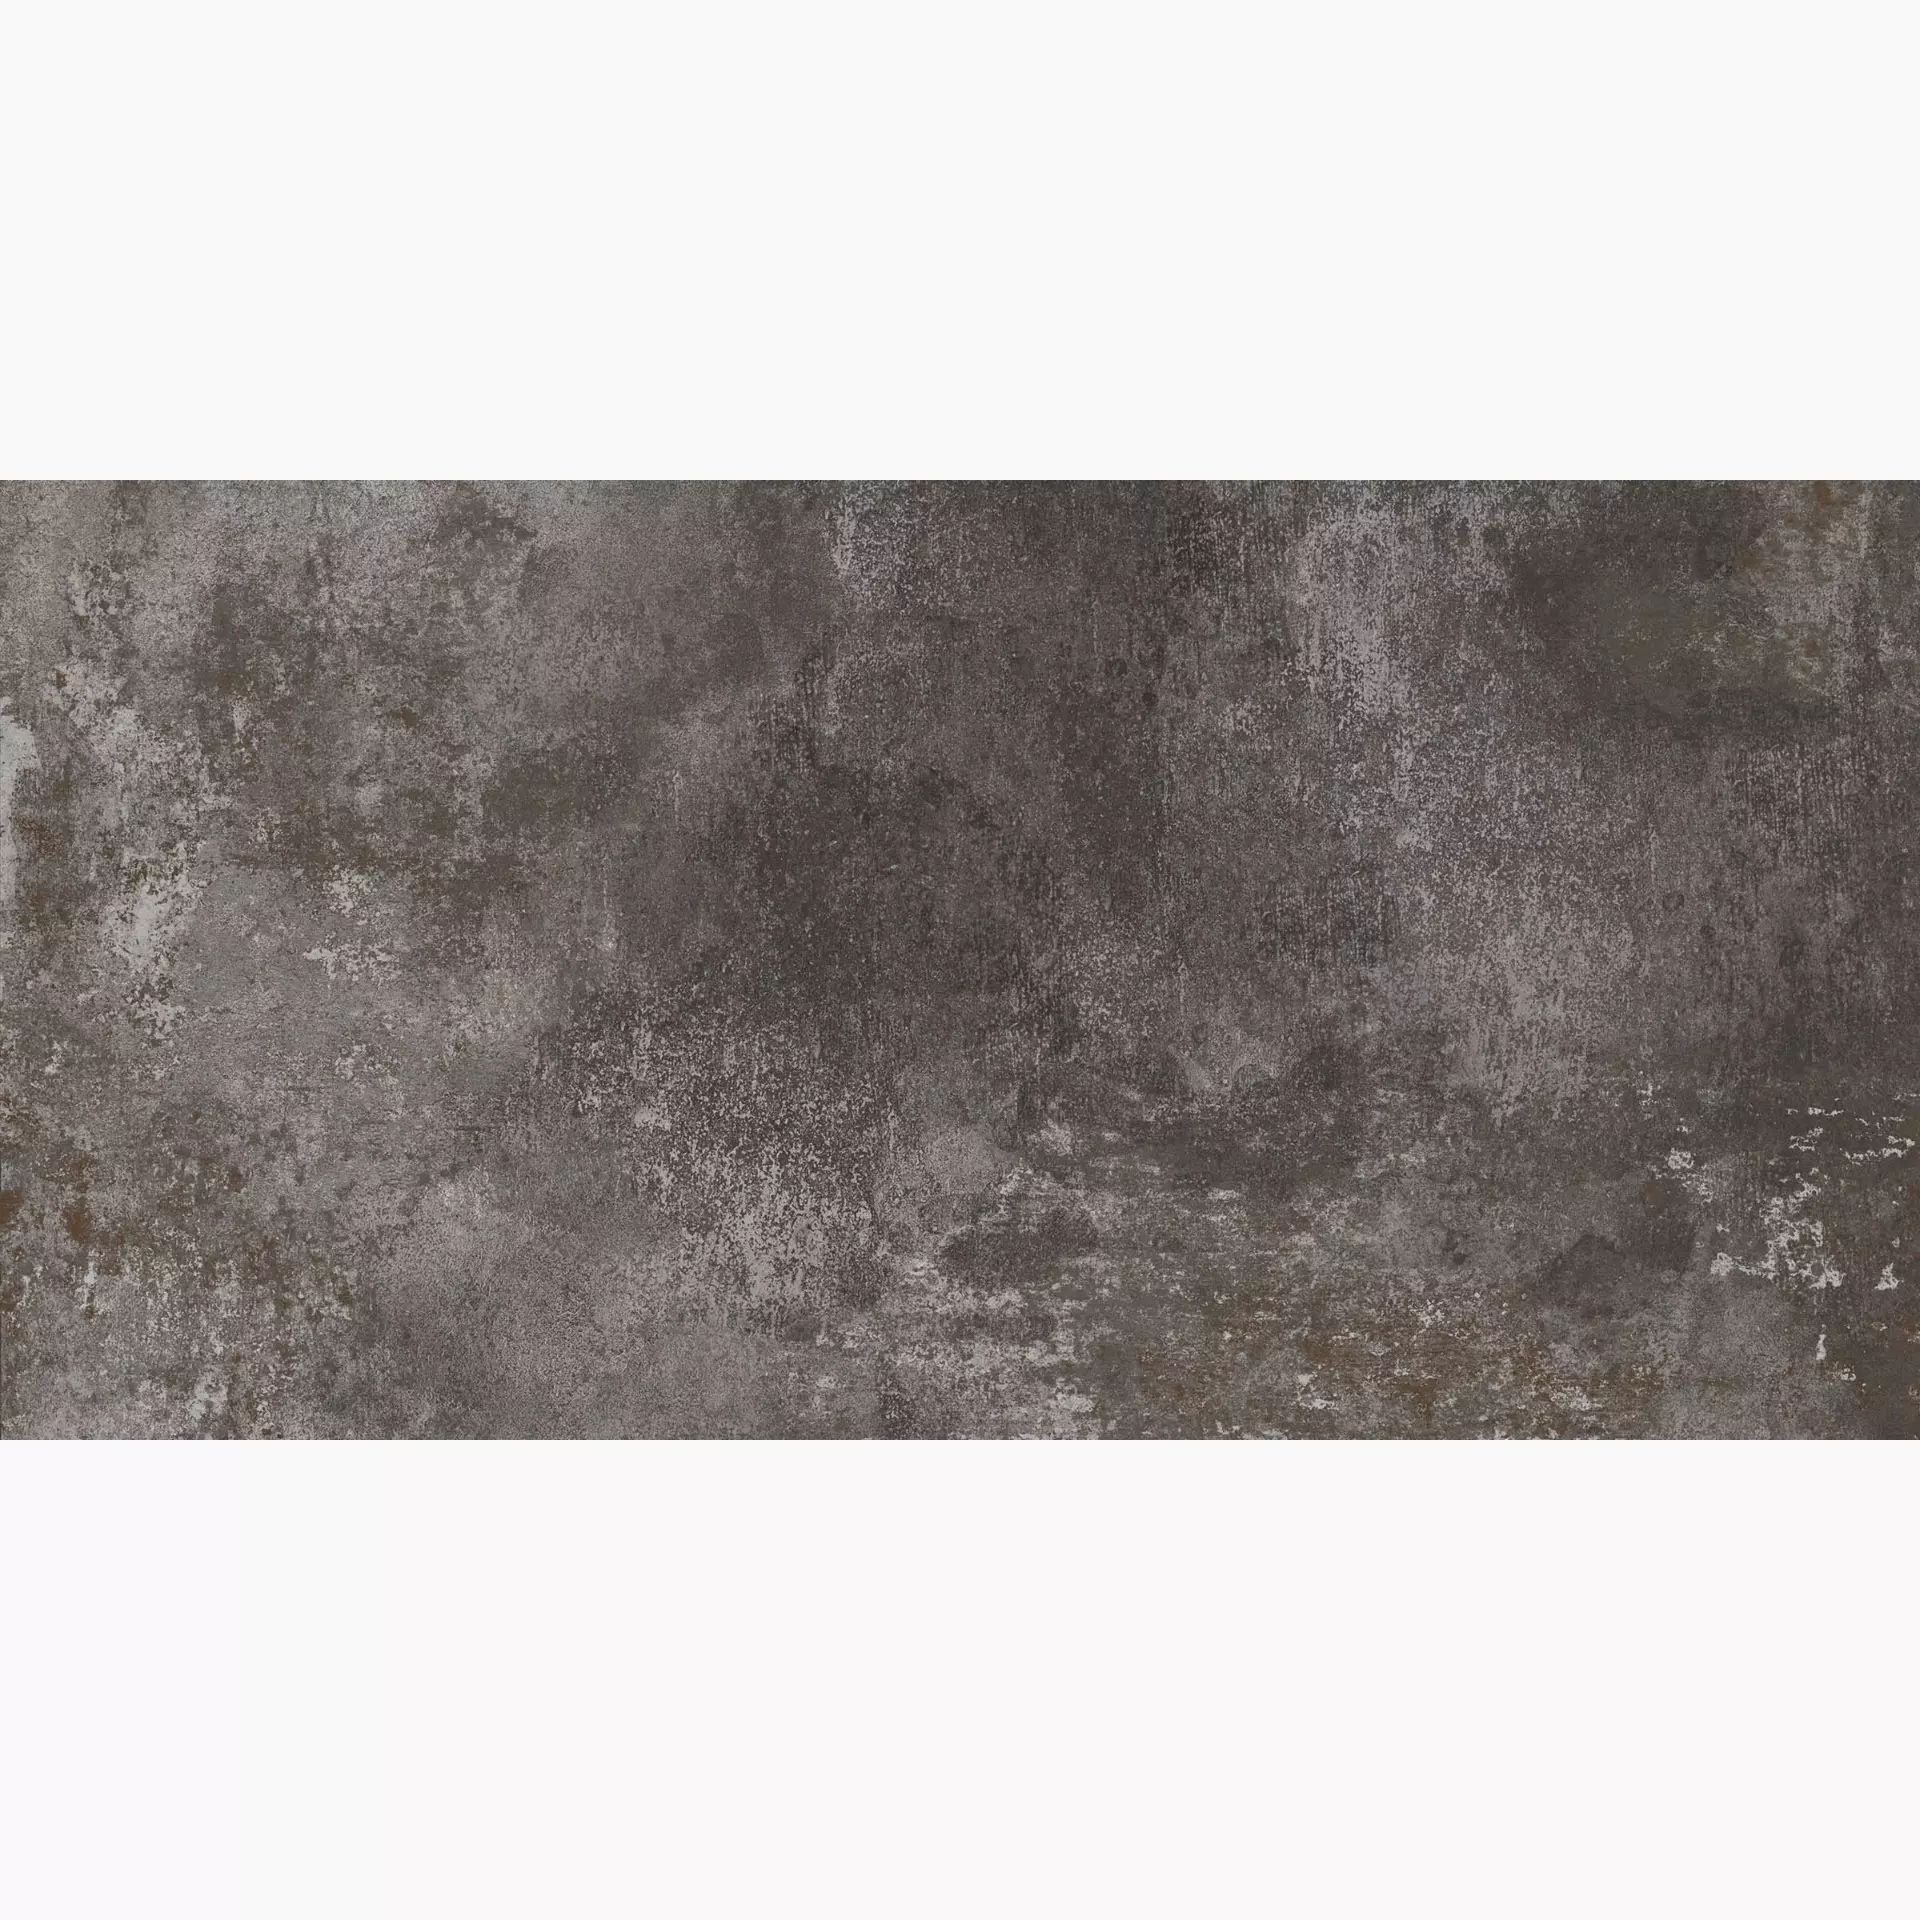 ABK Ghost Taupe Naturale PF60004366 60x120cm rectified 8,5mm